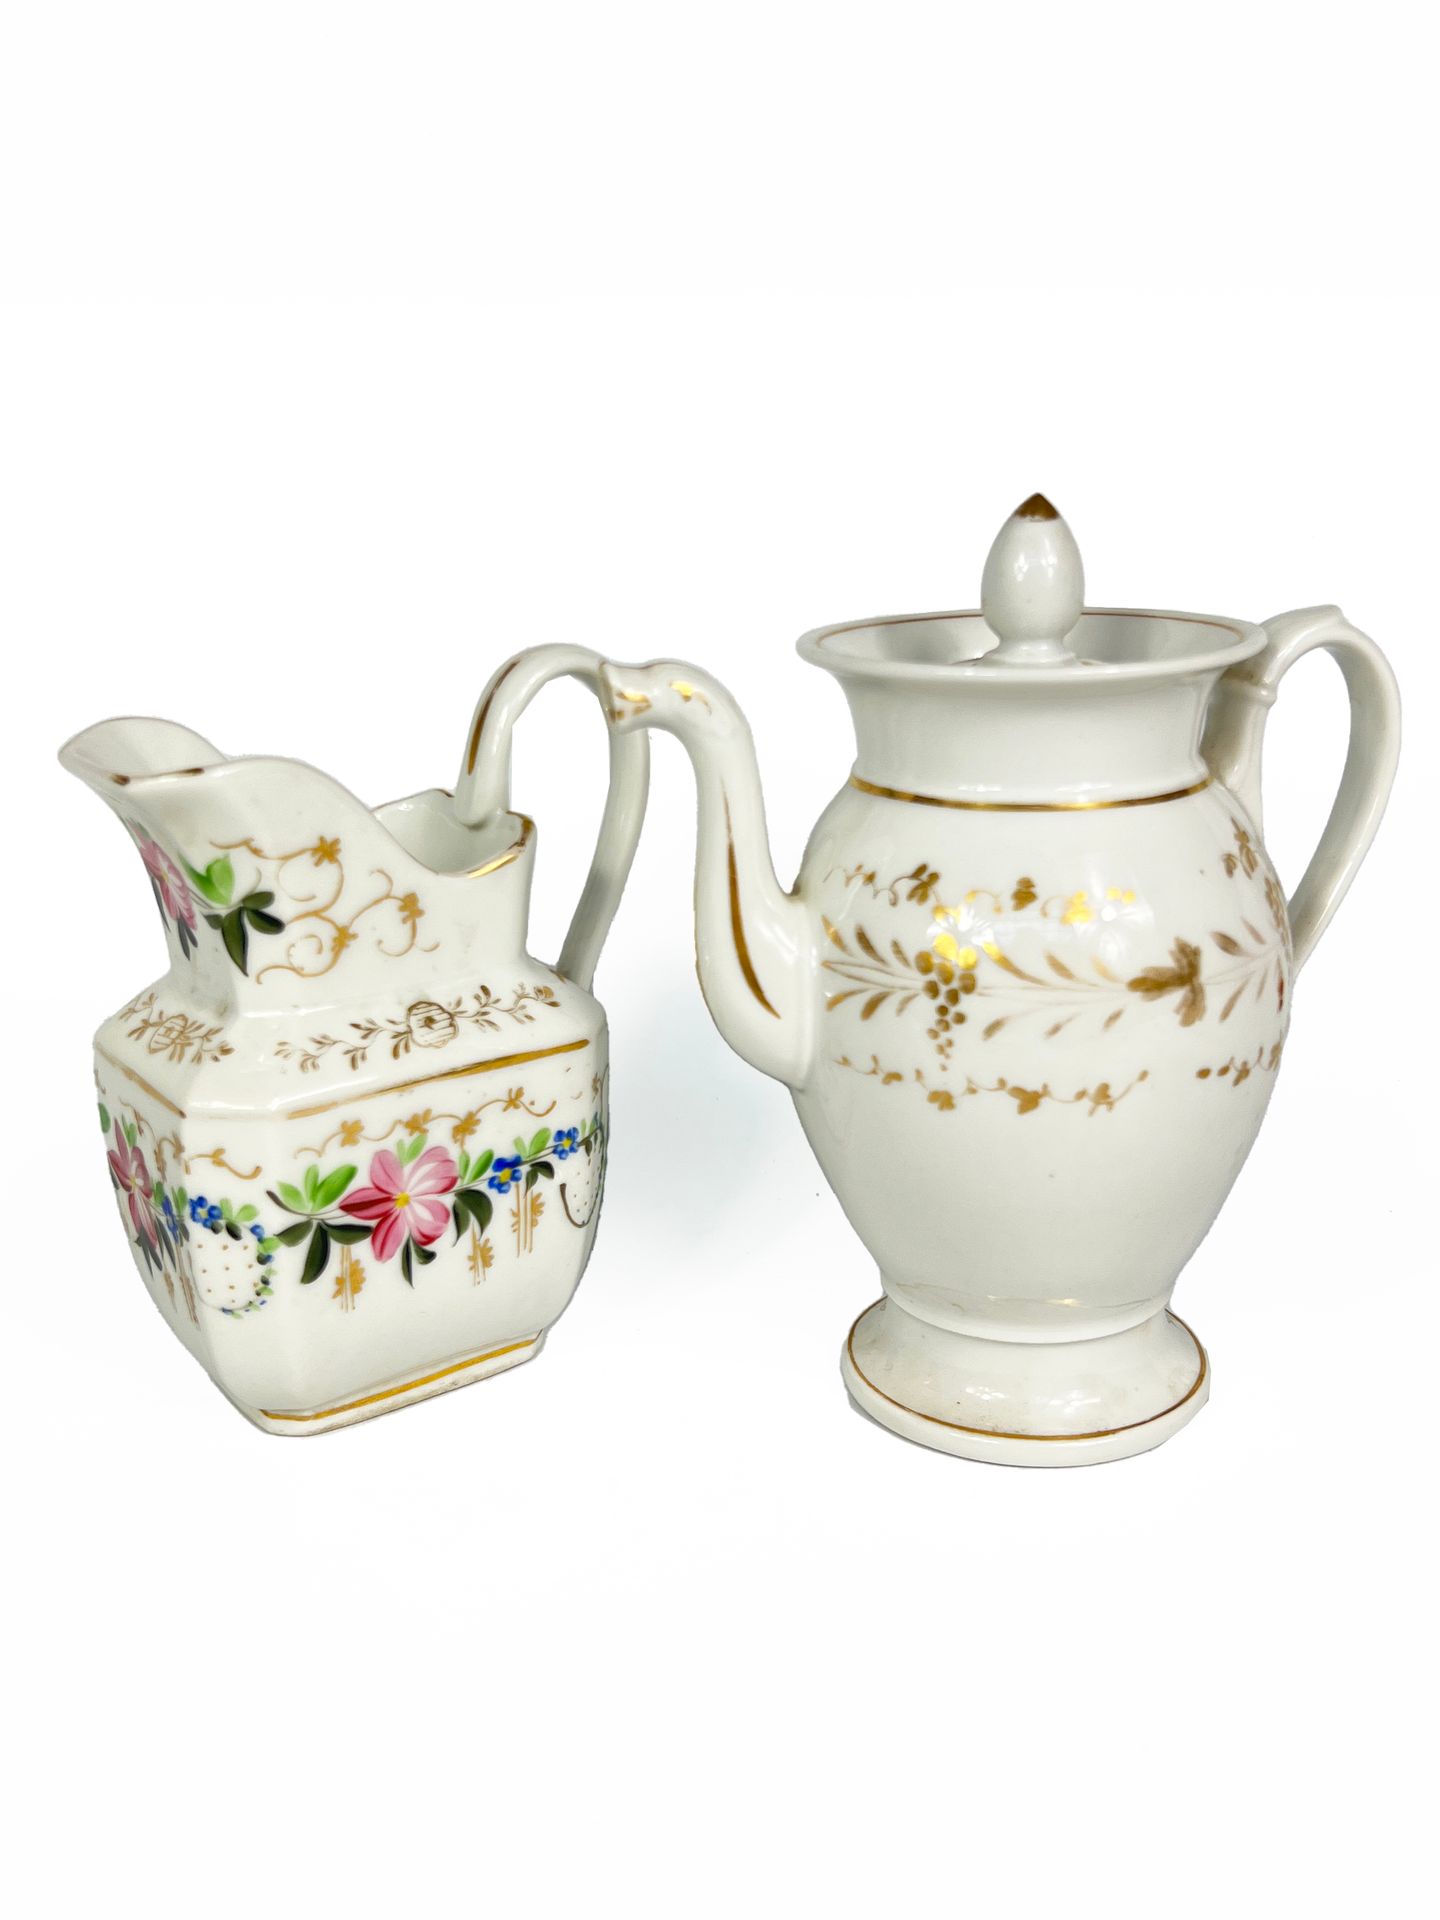 Null PARIS, XIXth century

Lot of a porcelain teapot and a milk jug with polychr&hellip;